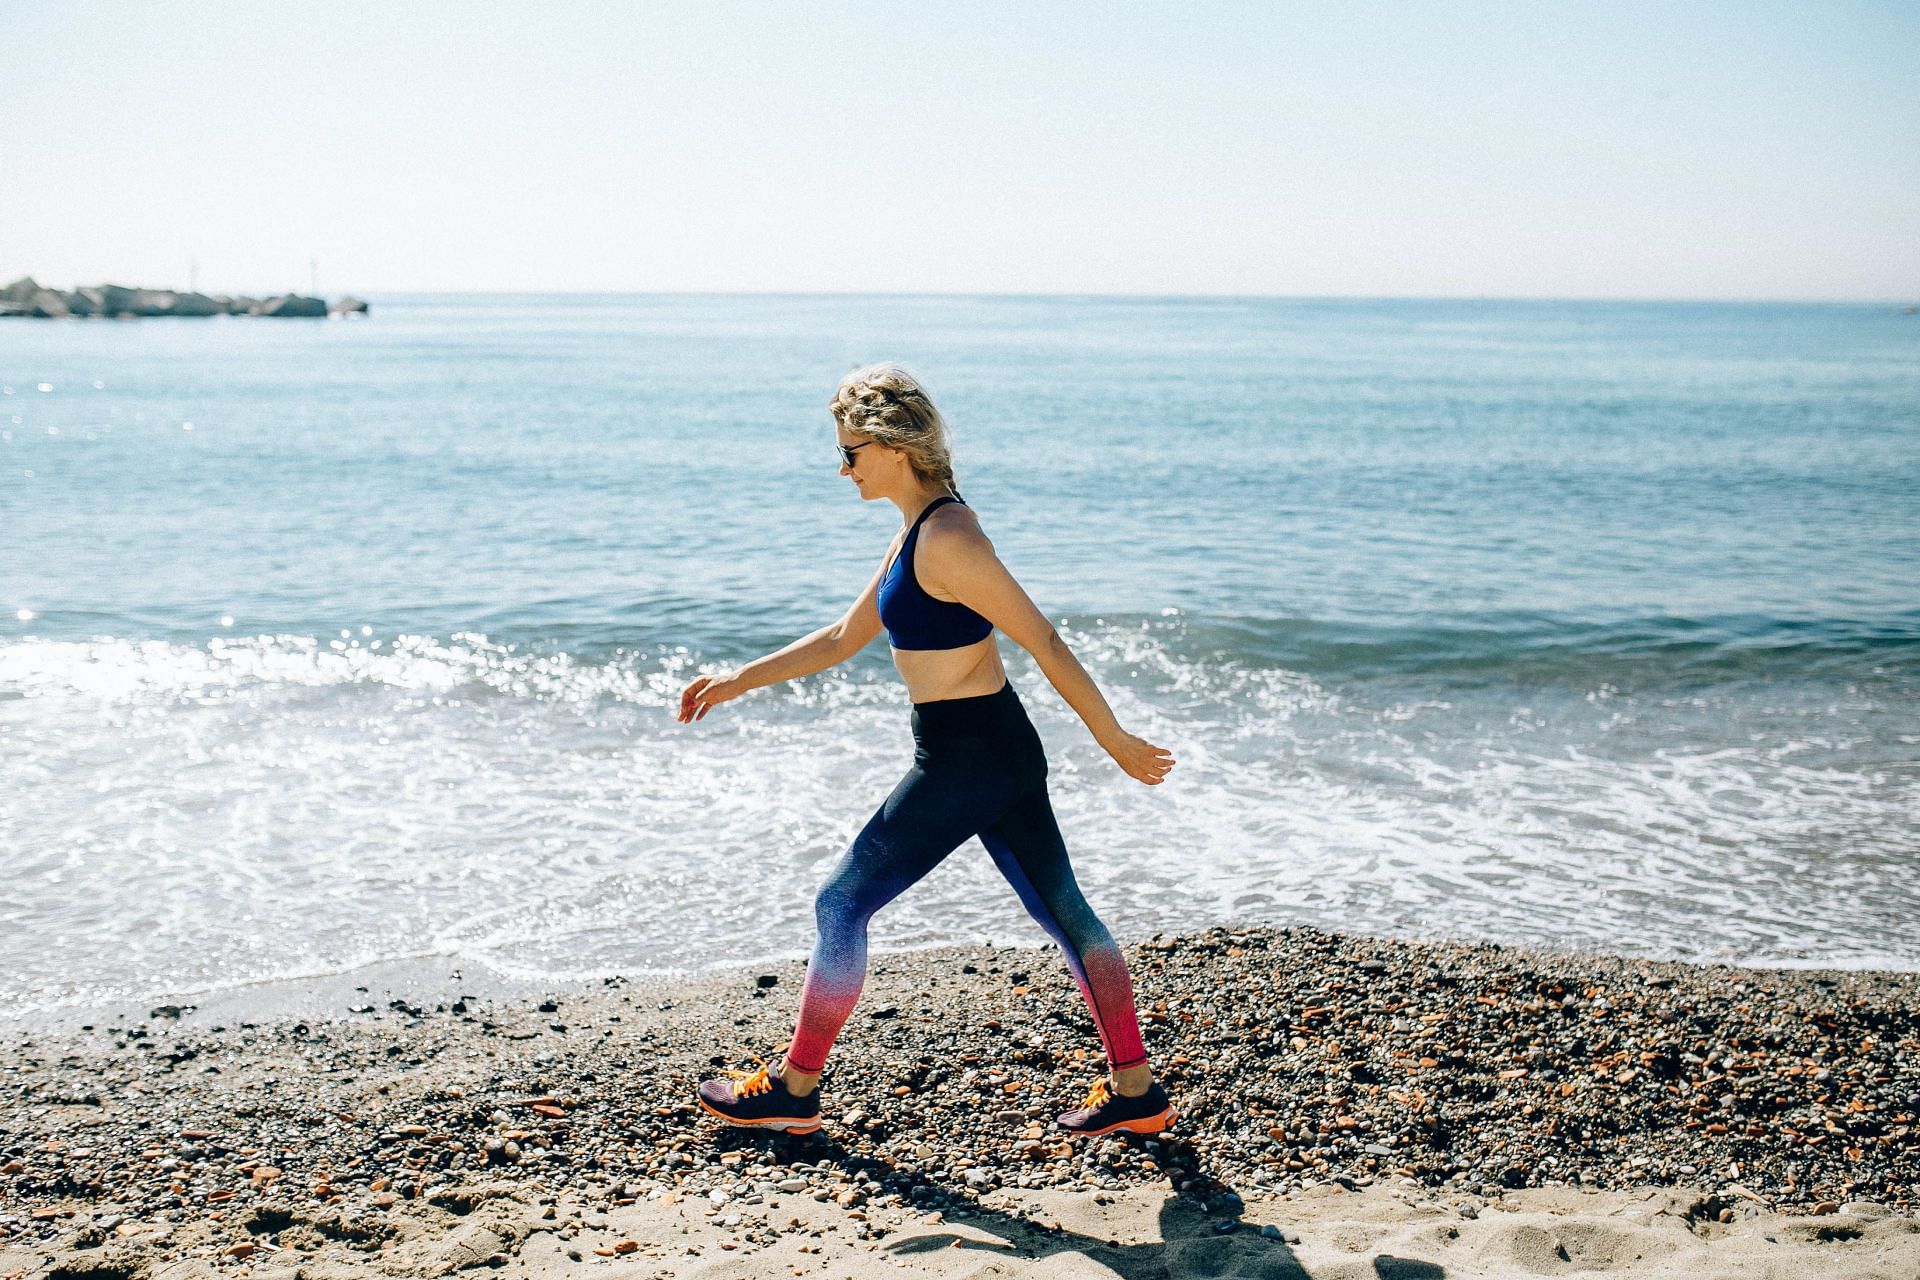 When opting for walking for weight loss, power walking is healthier. (Image via Pexels/ Nataliya Vaitkevich)